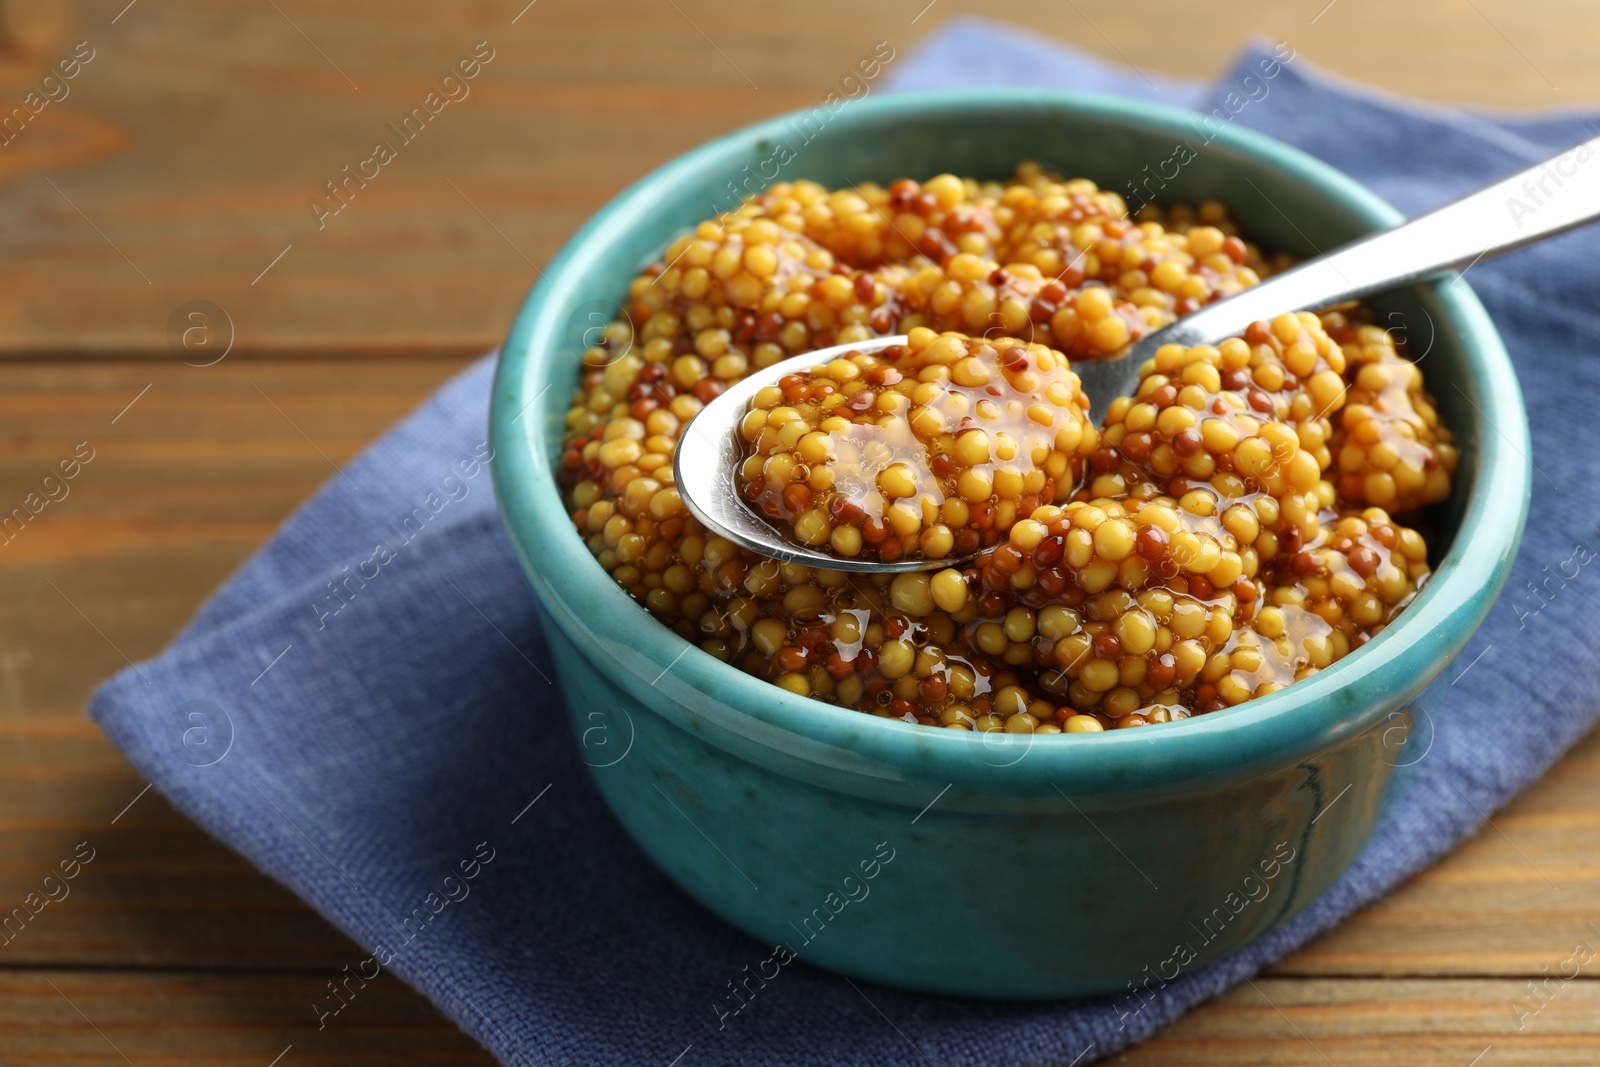 Photo of Whole grain mustard in bowl and spoon on wooden table, closeup